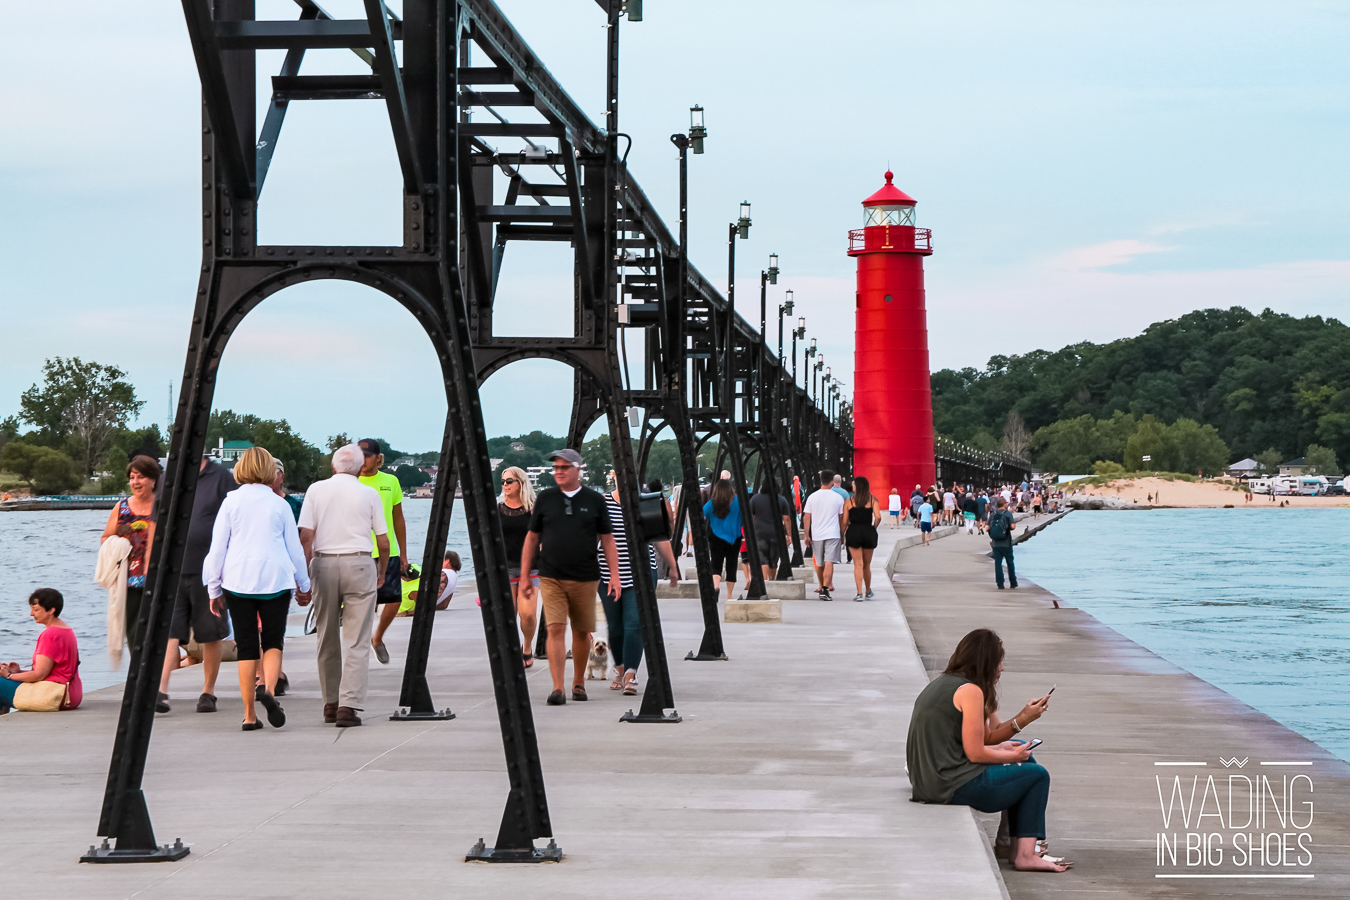 Wading in Big Shoes - Our 12-Hour Grand Haven Day Trip: Beaches, Eats, & Sunsets